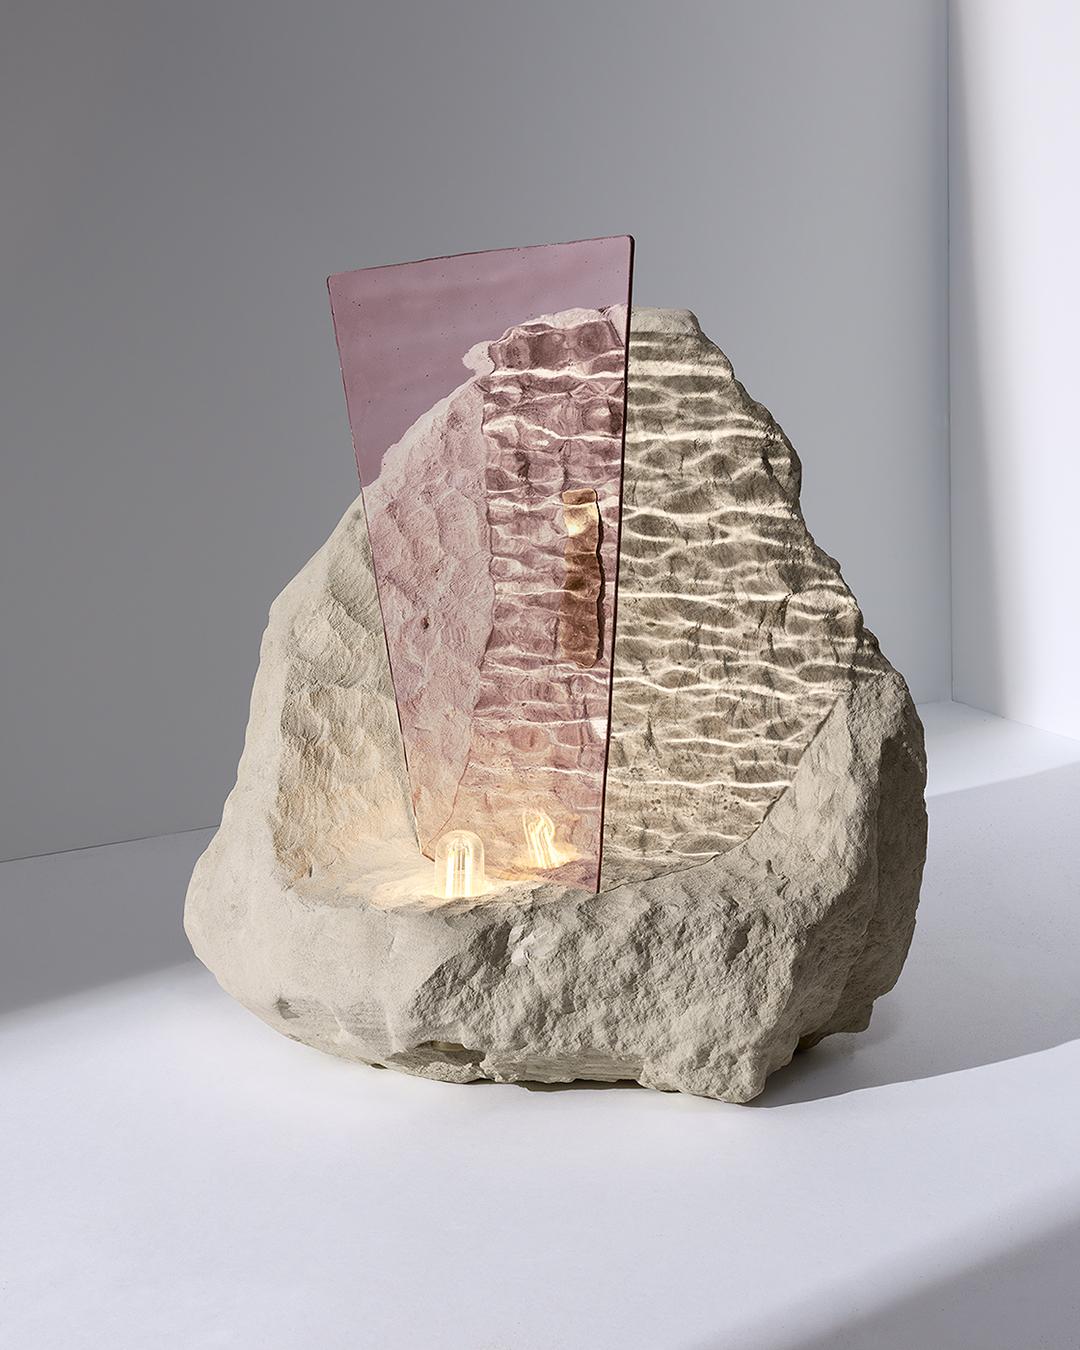 Tinharé by Precious Artefact
Dimensions: Base: Width 15.74 inches, height 16.53 inches, depth 13.77 inches
 Glass height 11.81 inches 
 Total height 18.50 inches
Materials: Translucent wavy rose glass, Tufa stone and brass finishes

Off the